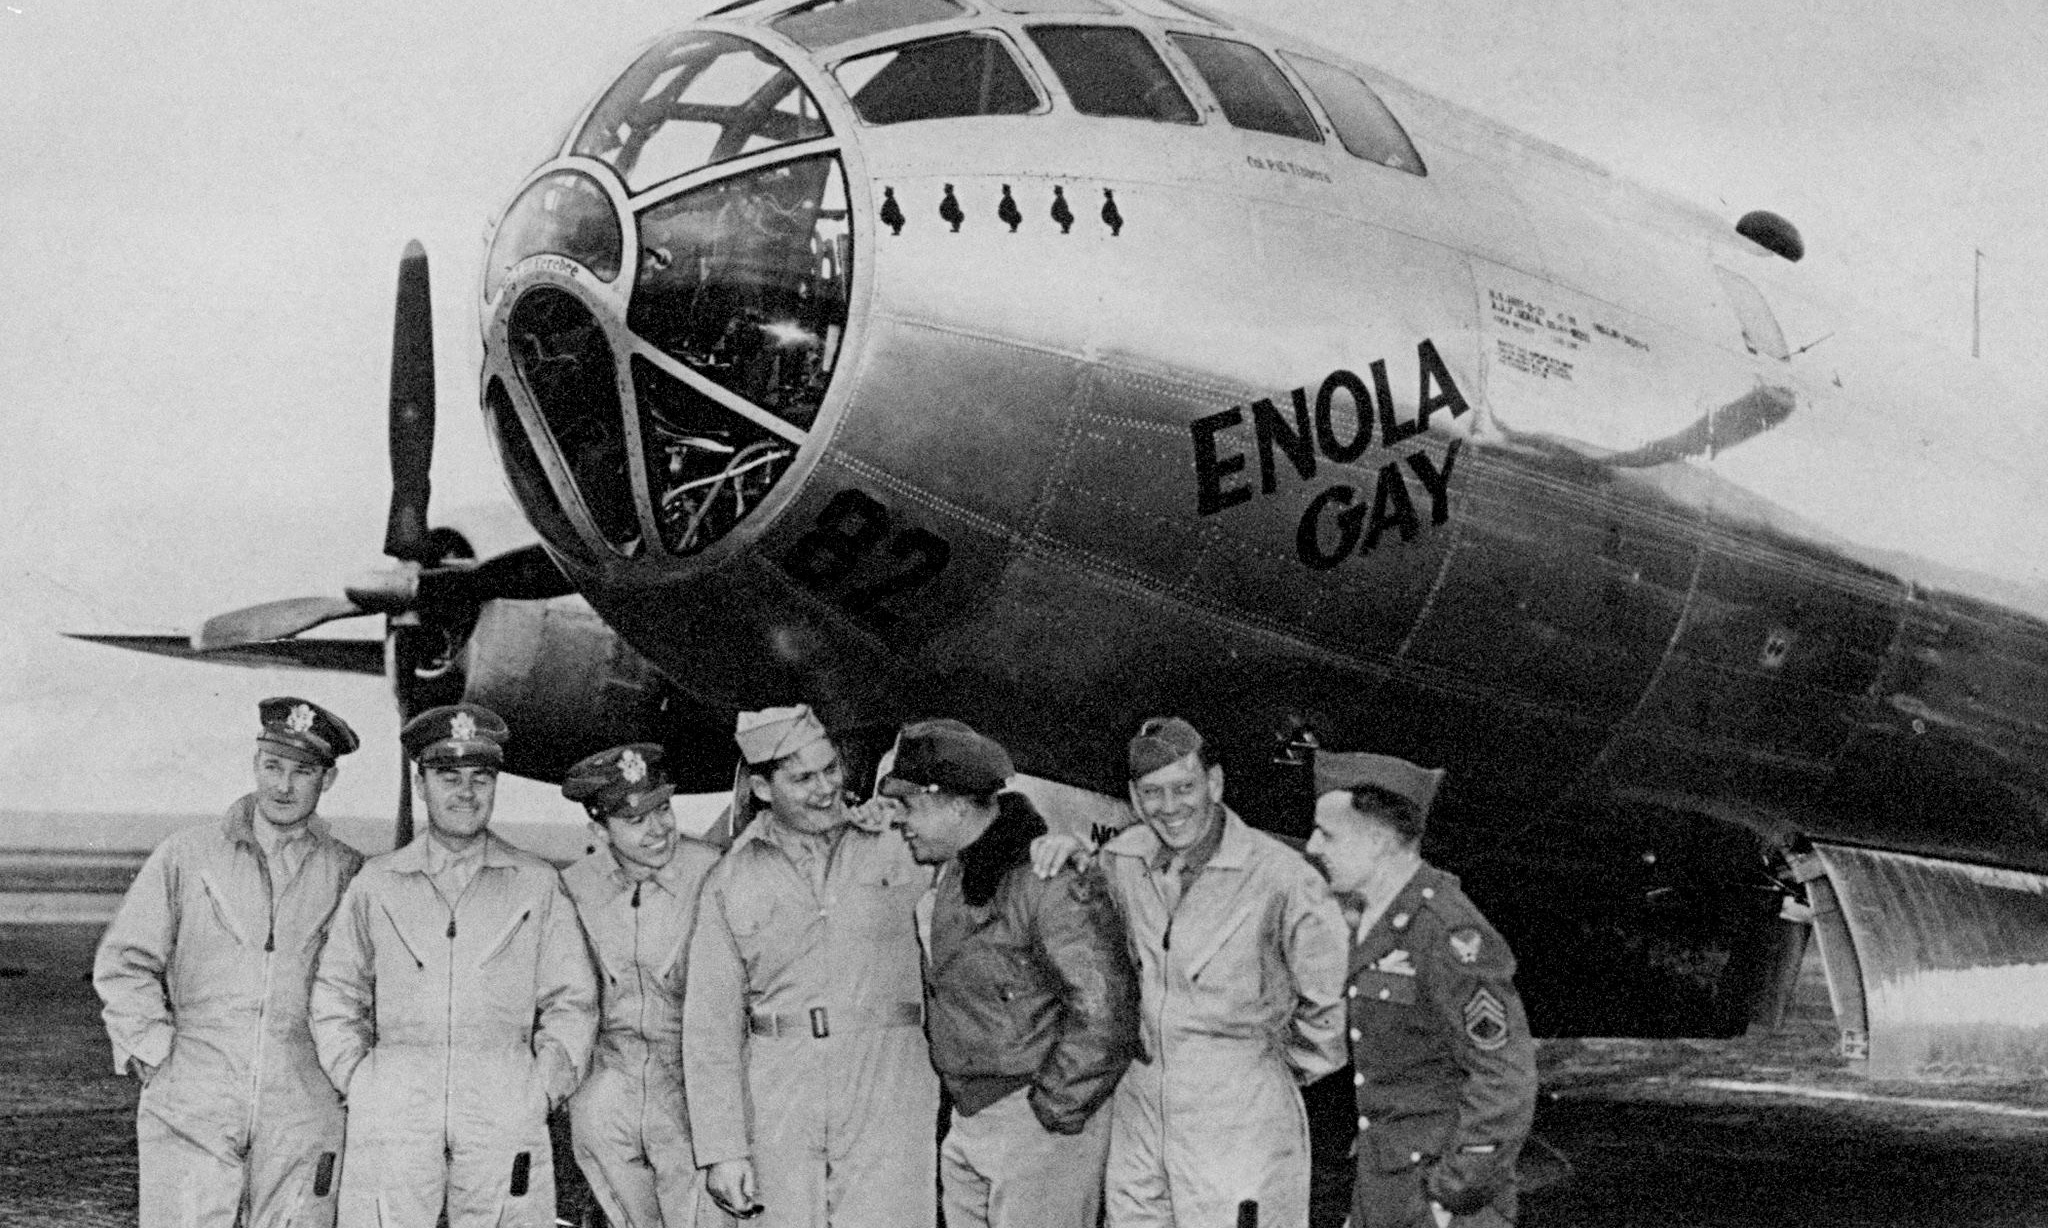 who was the pilot of the enola gay